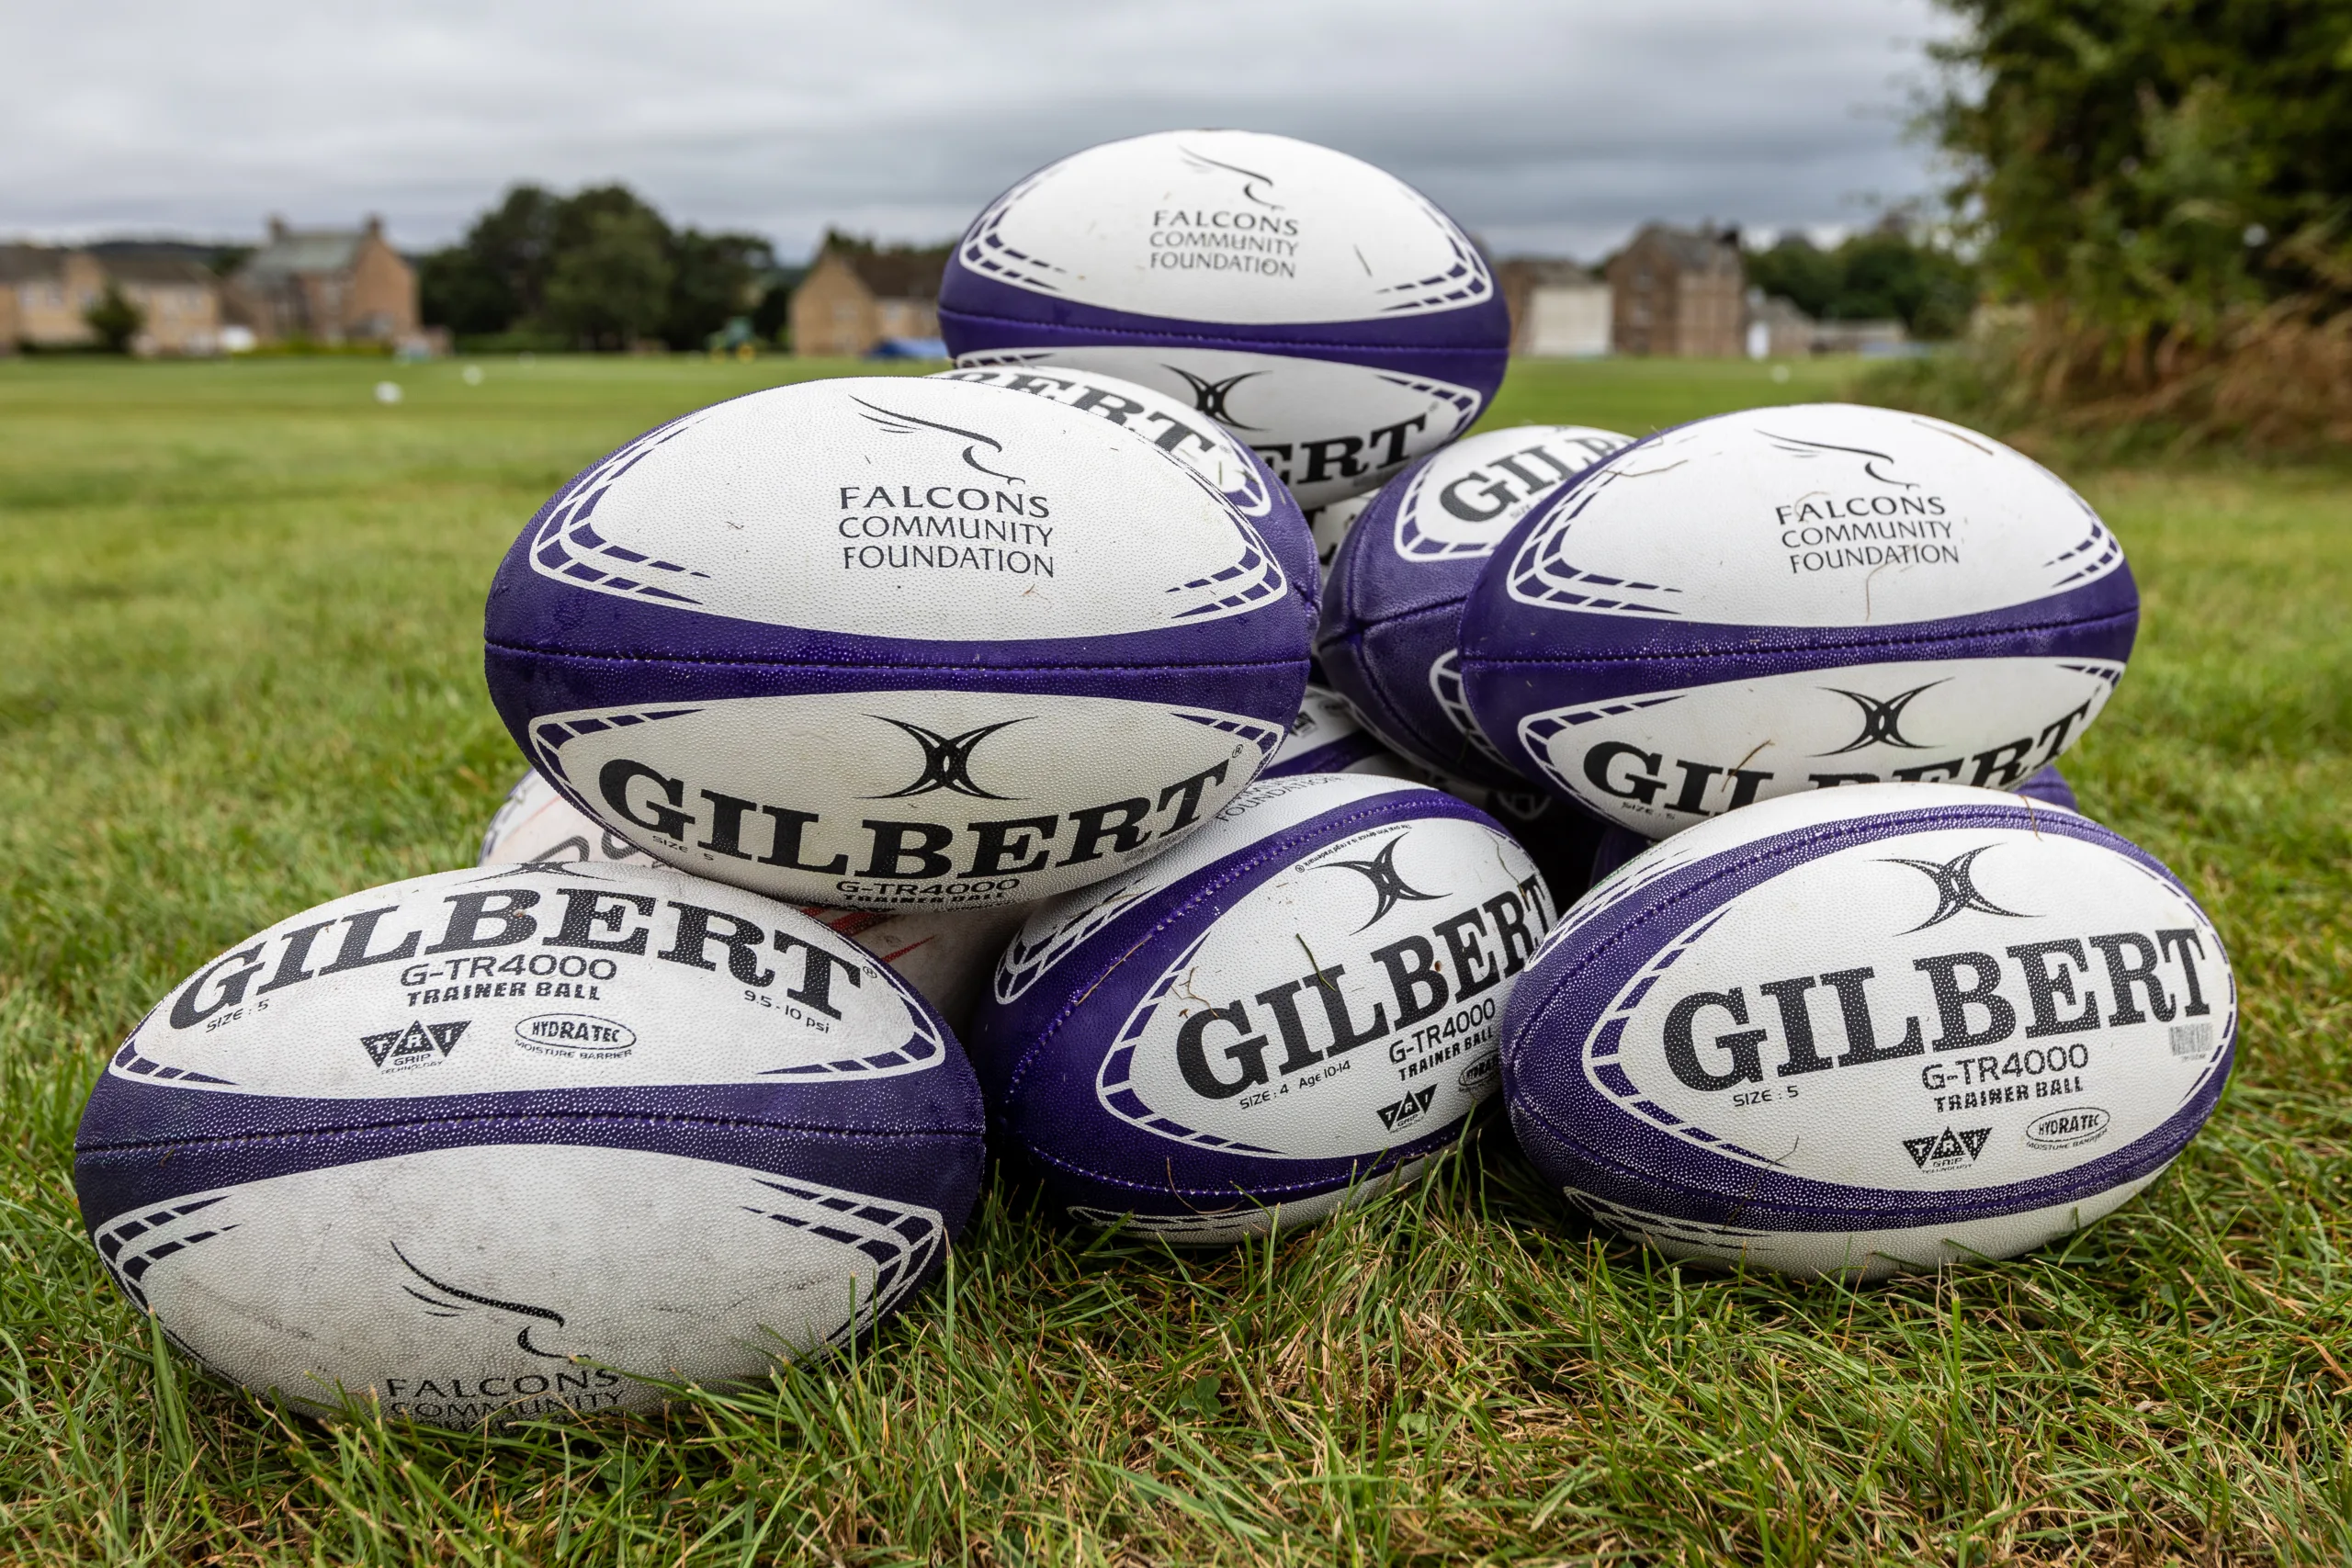 Get ready for an action-packed Caldy fixture